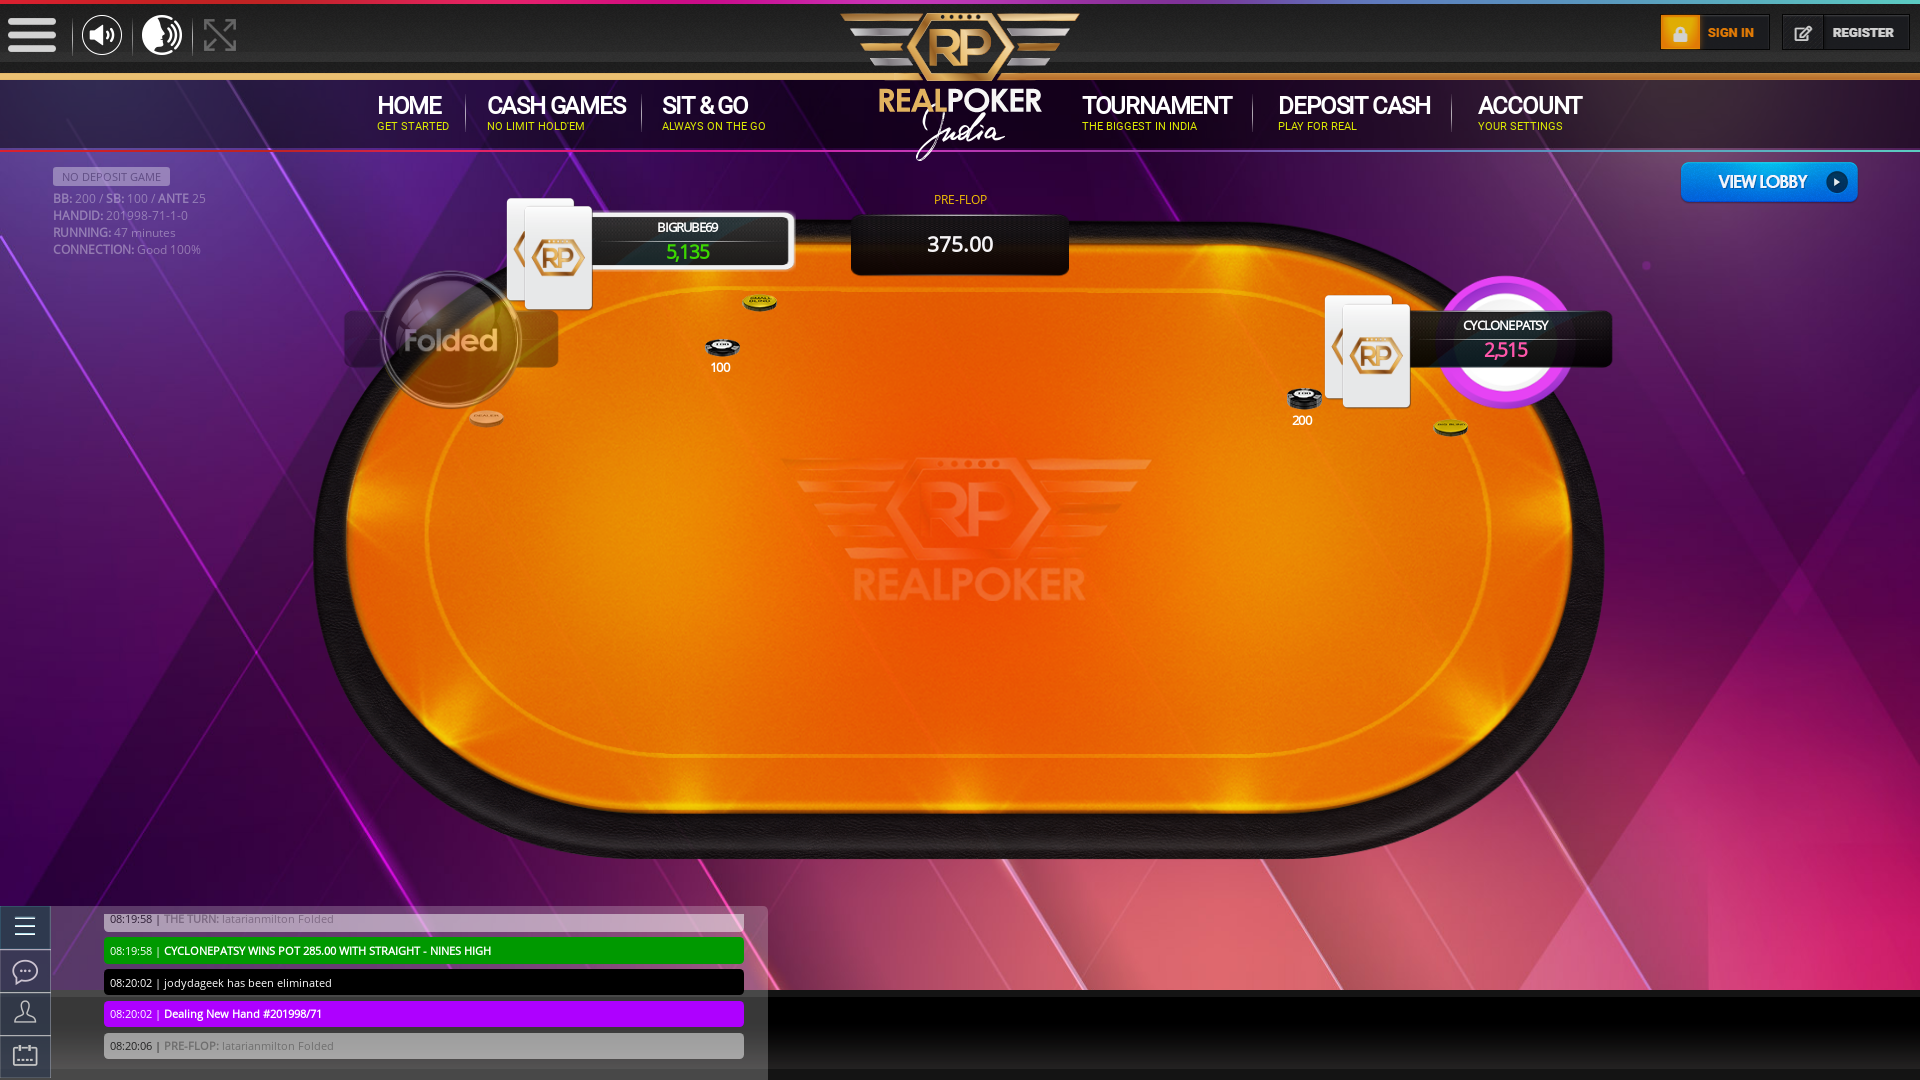 10 player texas holdem table at real poker with the table id 201998